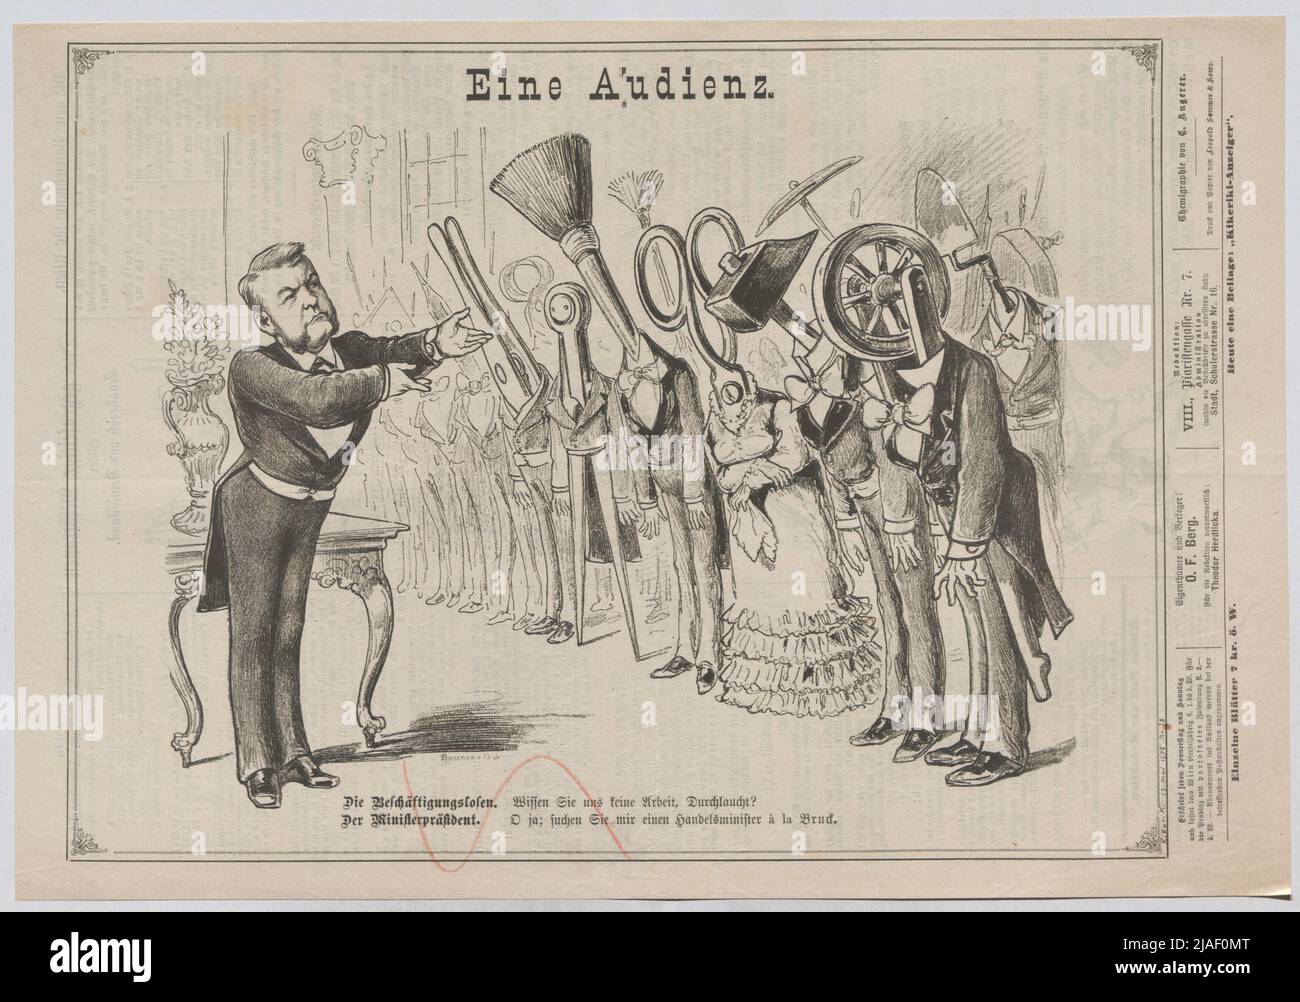 An audience. The unemployed: do not know us work, (...) The Prime Minister: O yes; Find me a Minister of Commerce (...) '. Prime Minister Auersperg; an audience, employmentless (caricature from' Kikeriki '). C. Angerer & Göschl, Realization Stock Photo